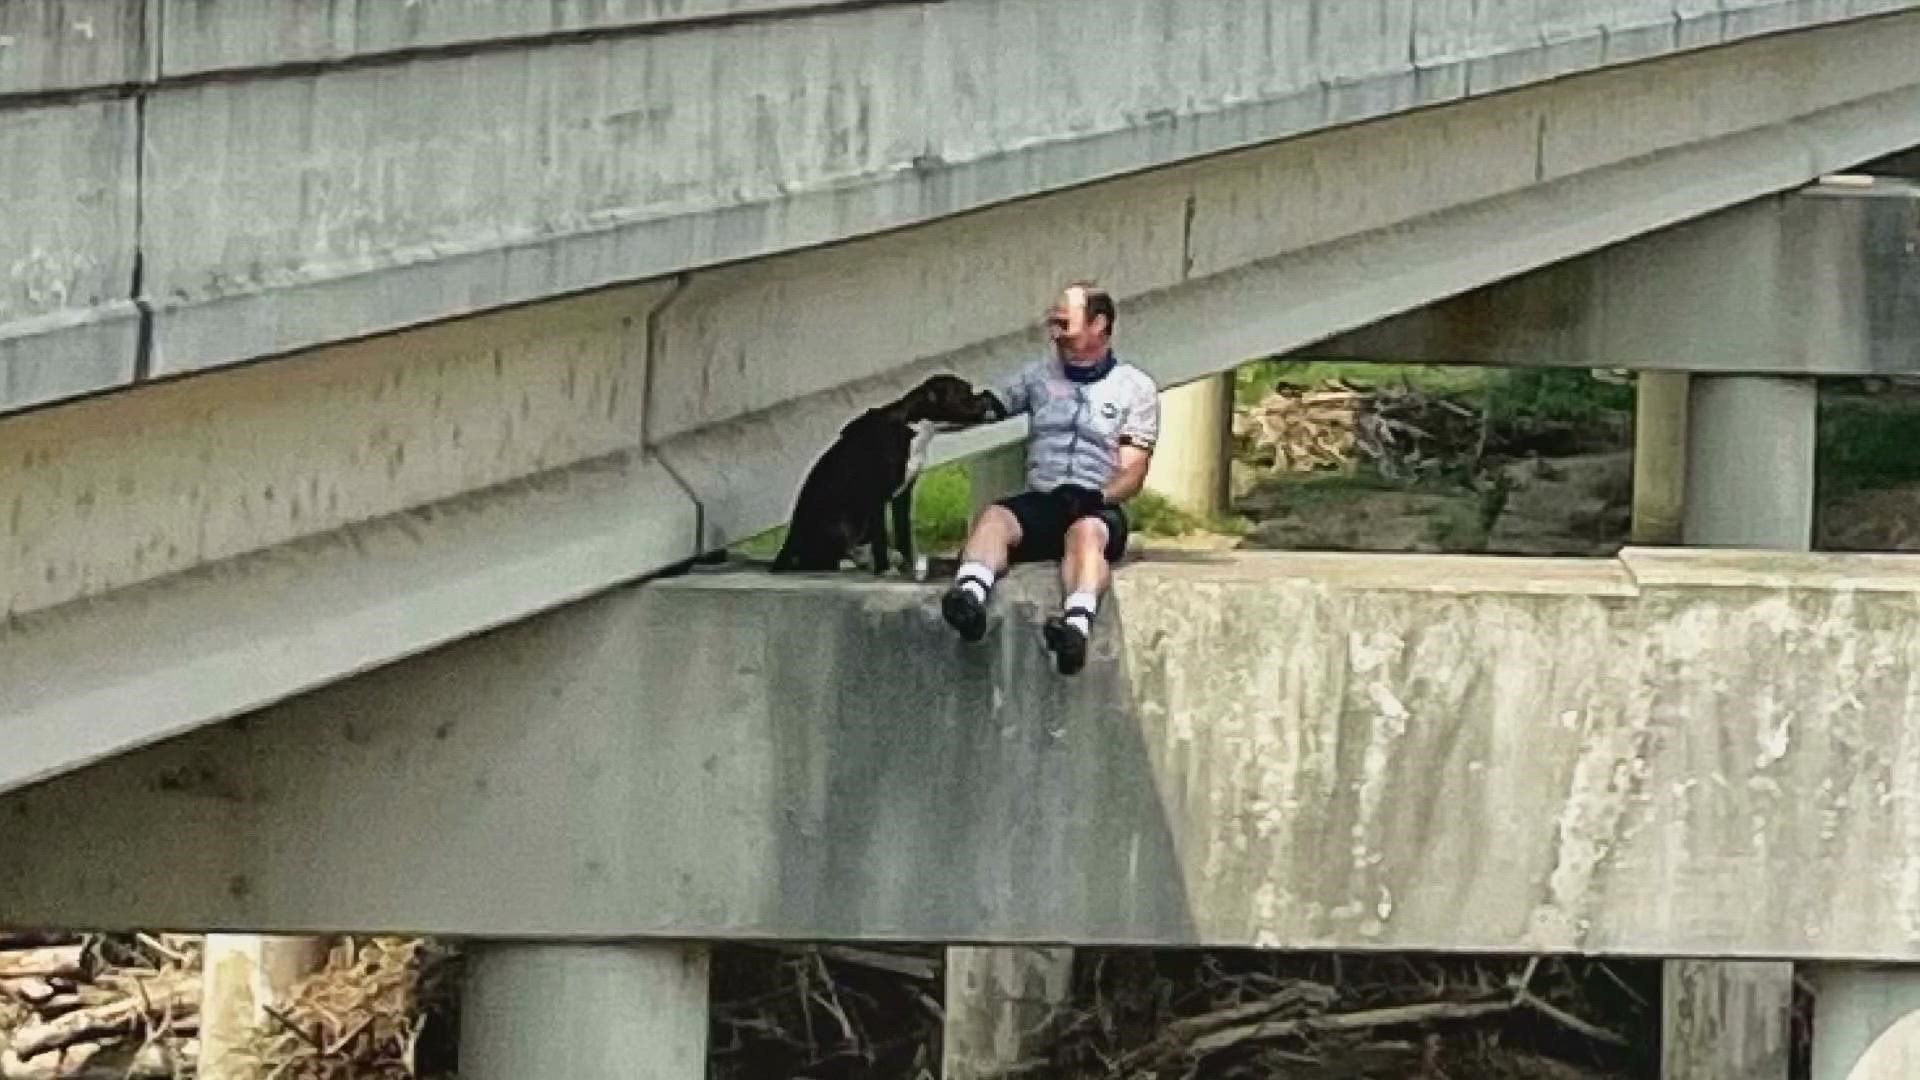 A group of cyclists from Fort Worth helped rescue a dog that was stuck on a bridge.